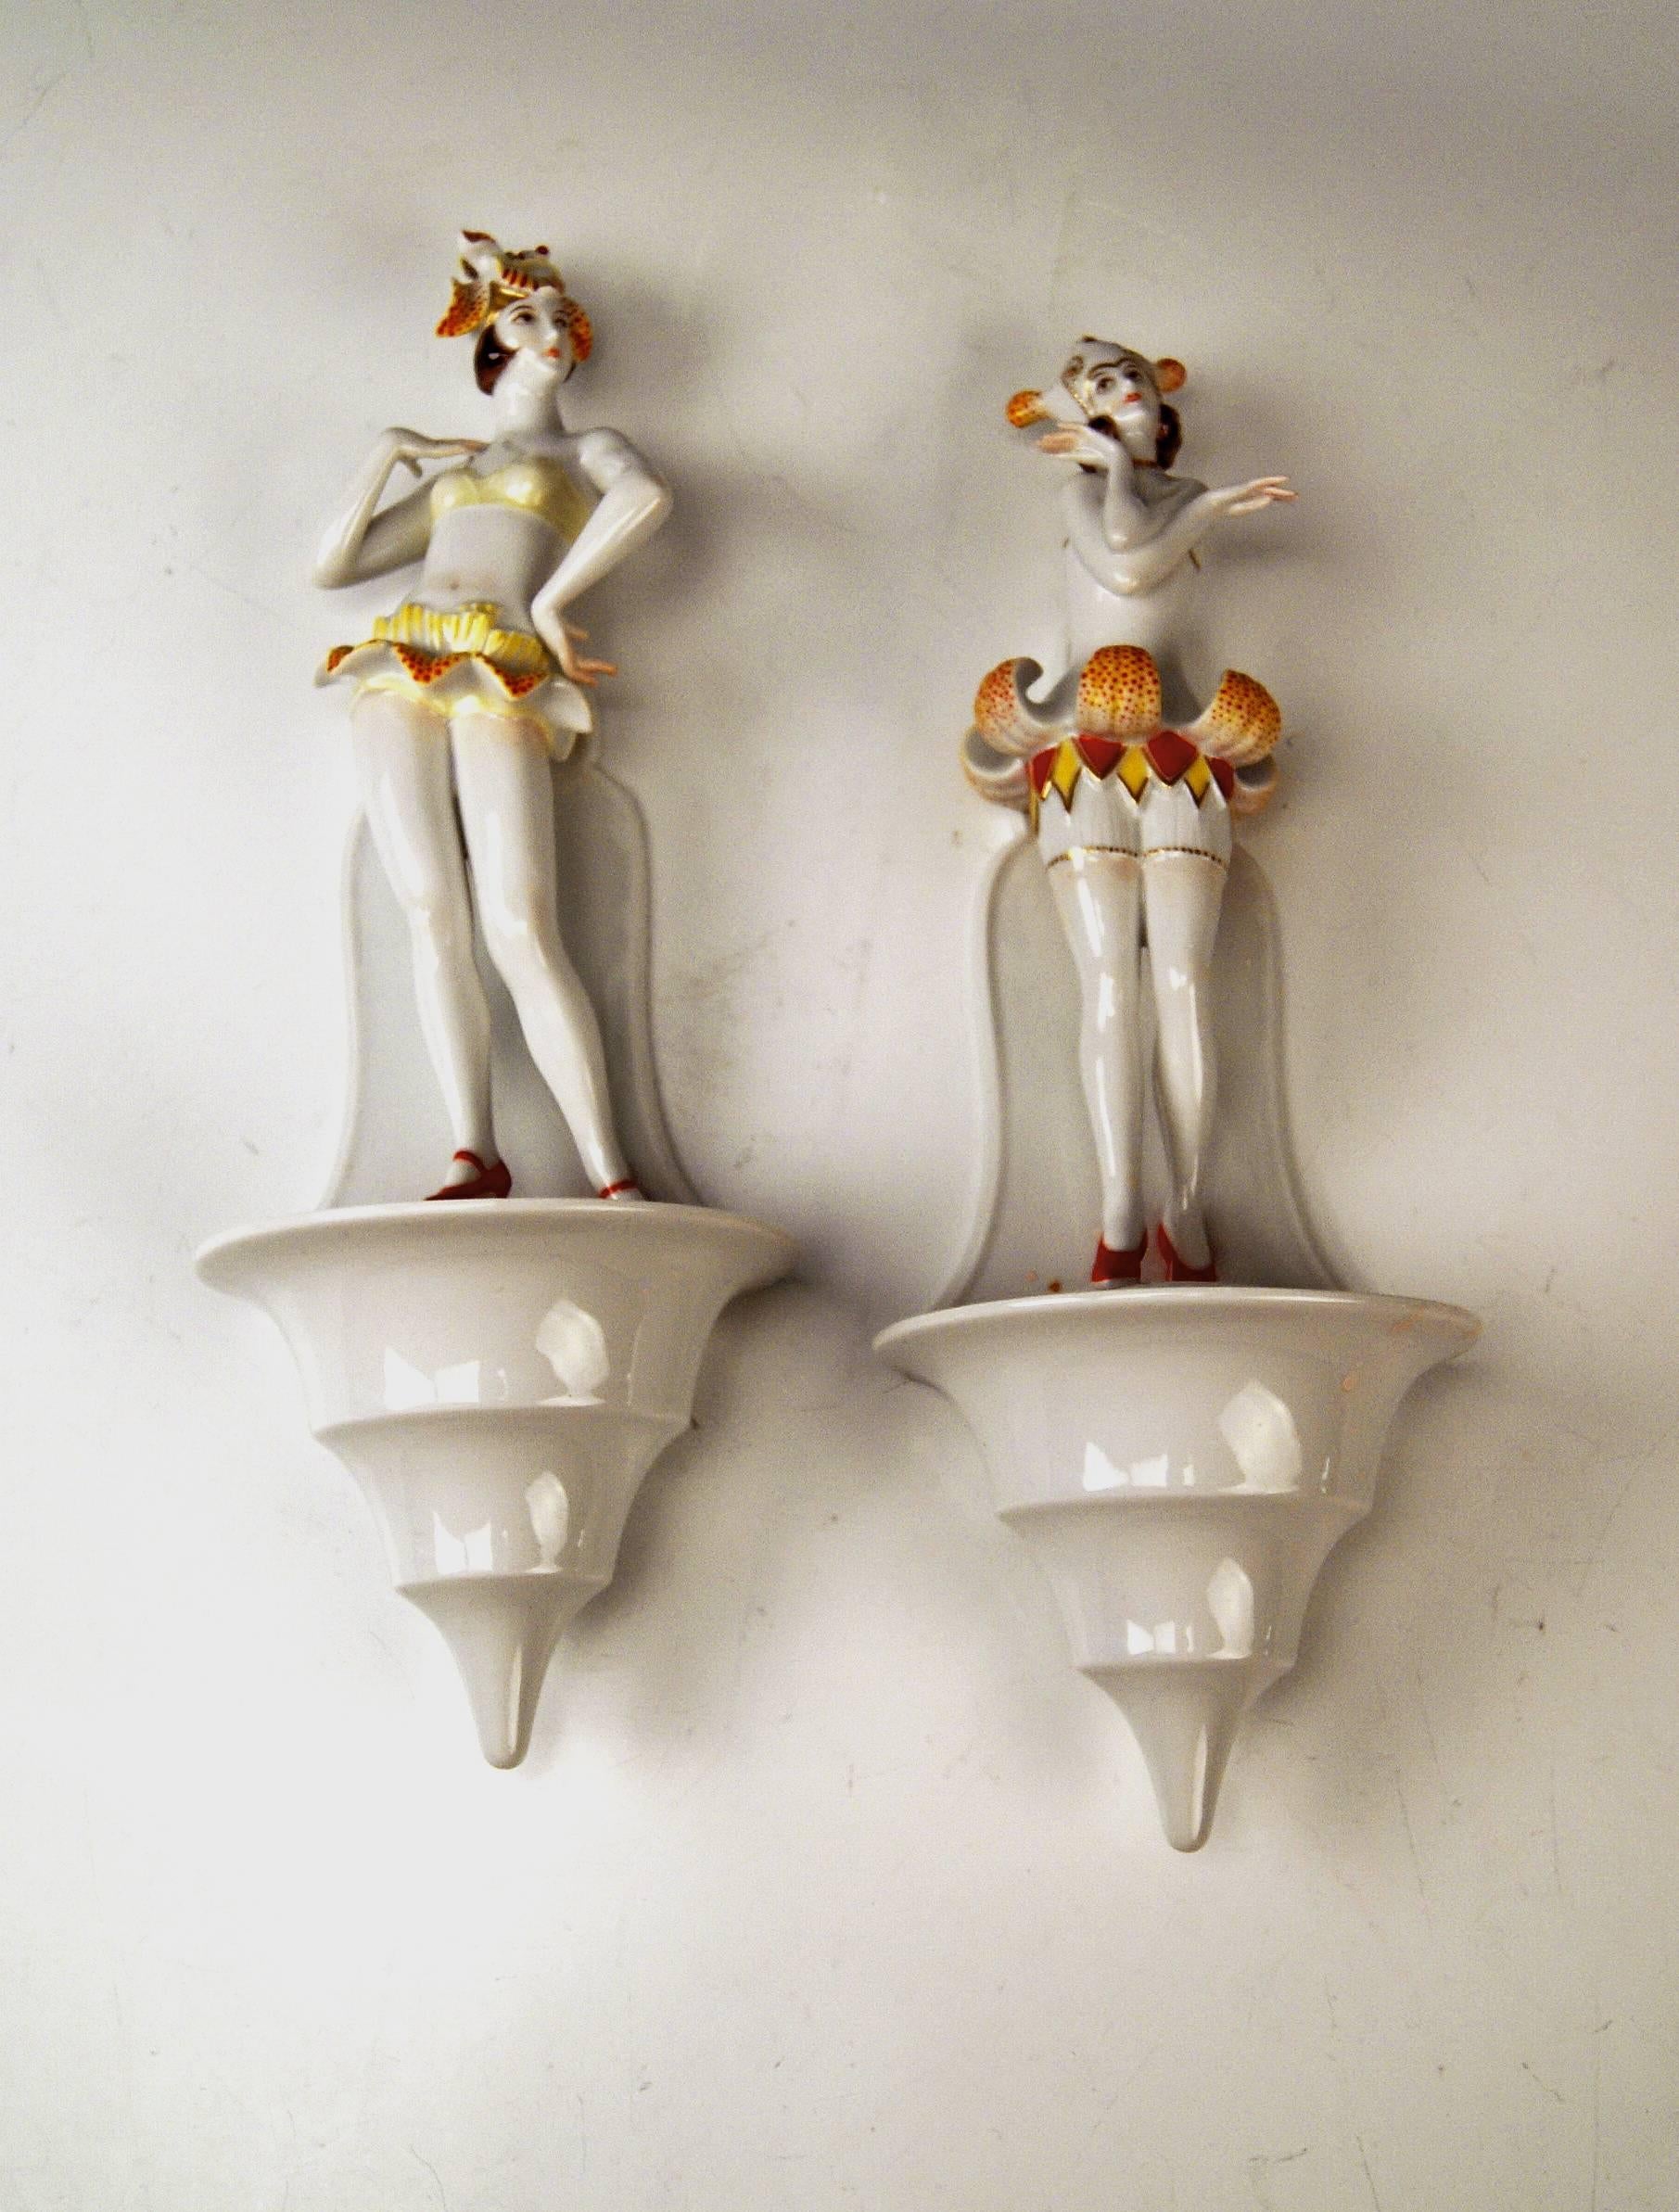 RAREST ROSENTHAL / GERMANY ITEMS:
A Pair of Art Deco Lotus Flowers on Wallmounted Flower Frog /
model created by Dorothea Charol in year 1929 at the Plössberg factory.

Very interesting, rarest Rosenthal Germany two female figurines having the